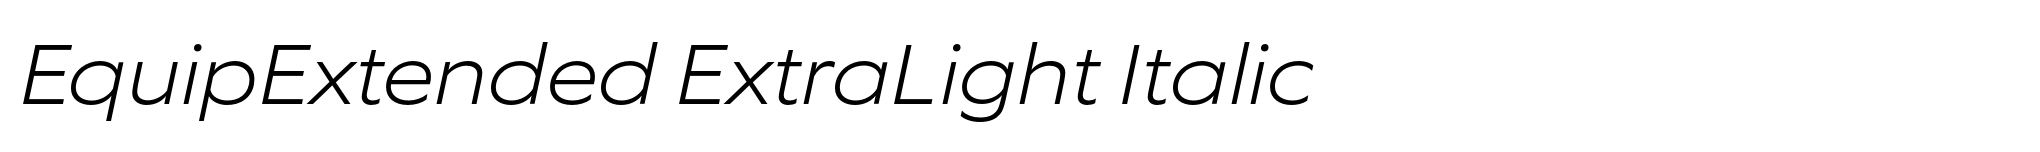 EquipExtended ExtraLight Italic image